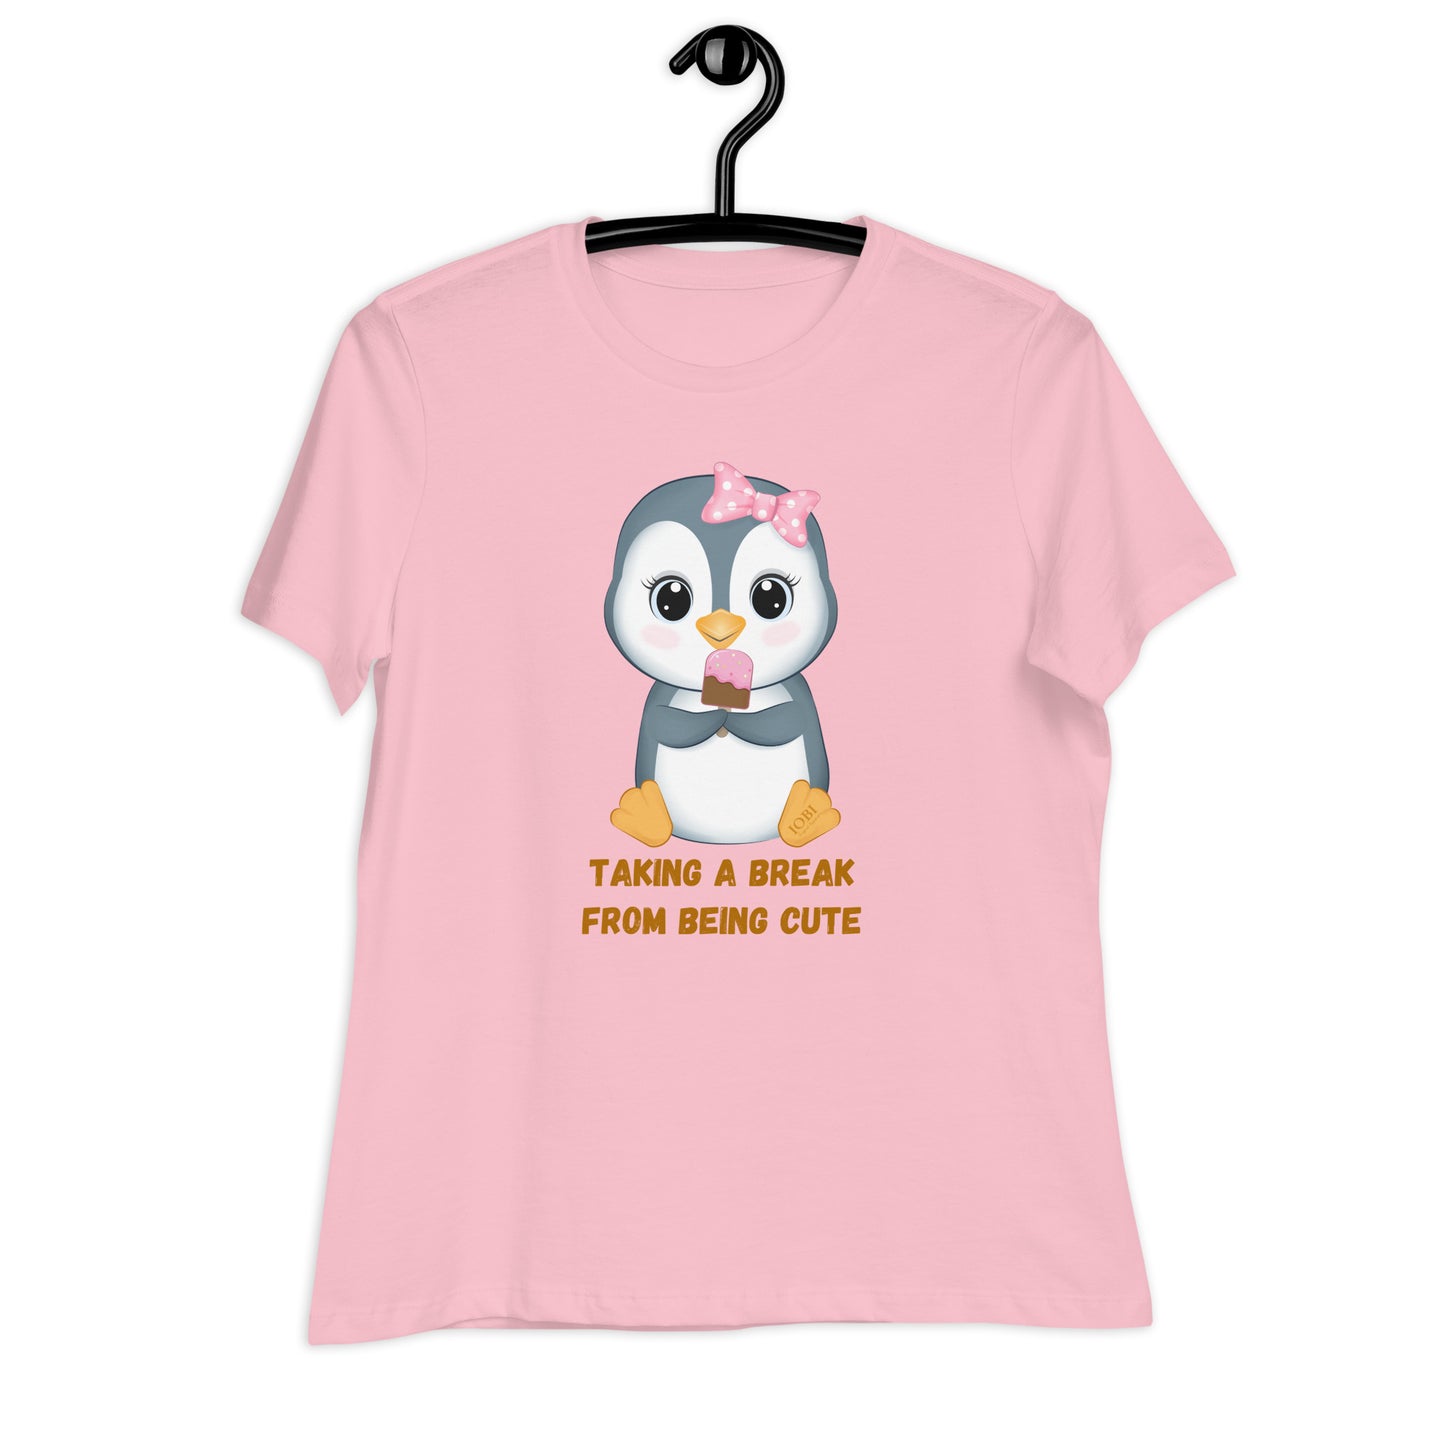 Women's Relaxed Soft & Smooth Premium Quality T-Shirt Taking A Break From Being Cute Penguin Design by IOBI Original Apparel